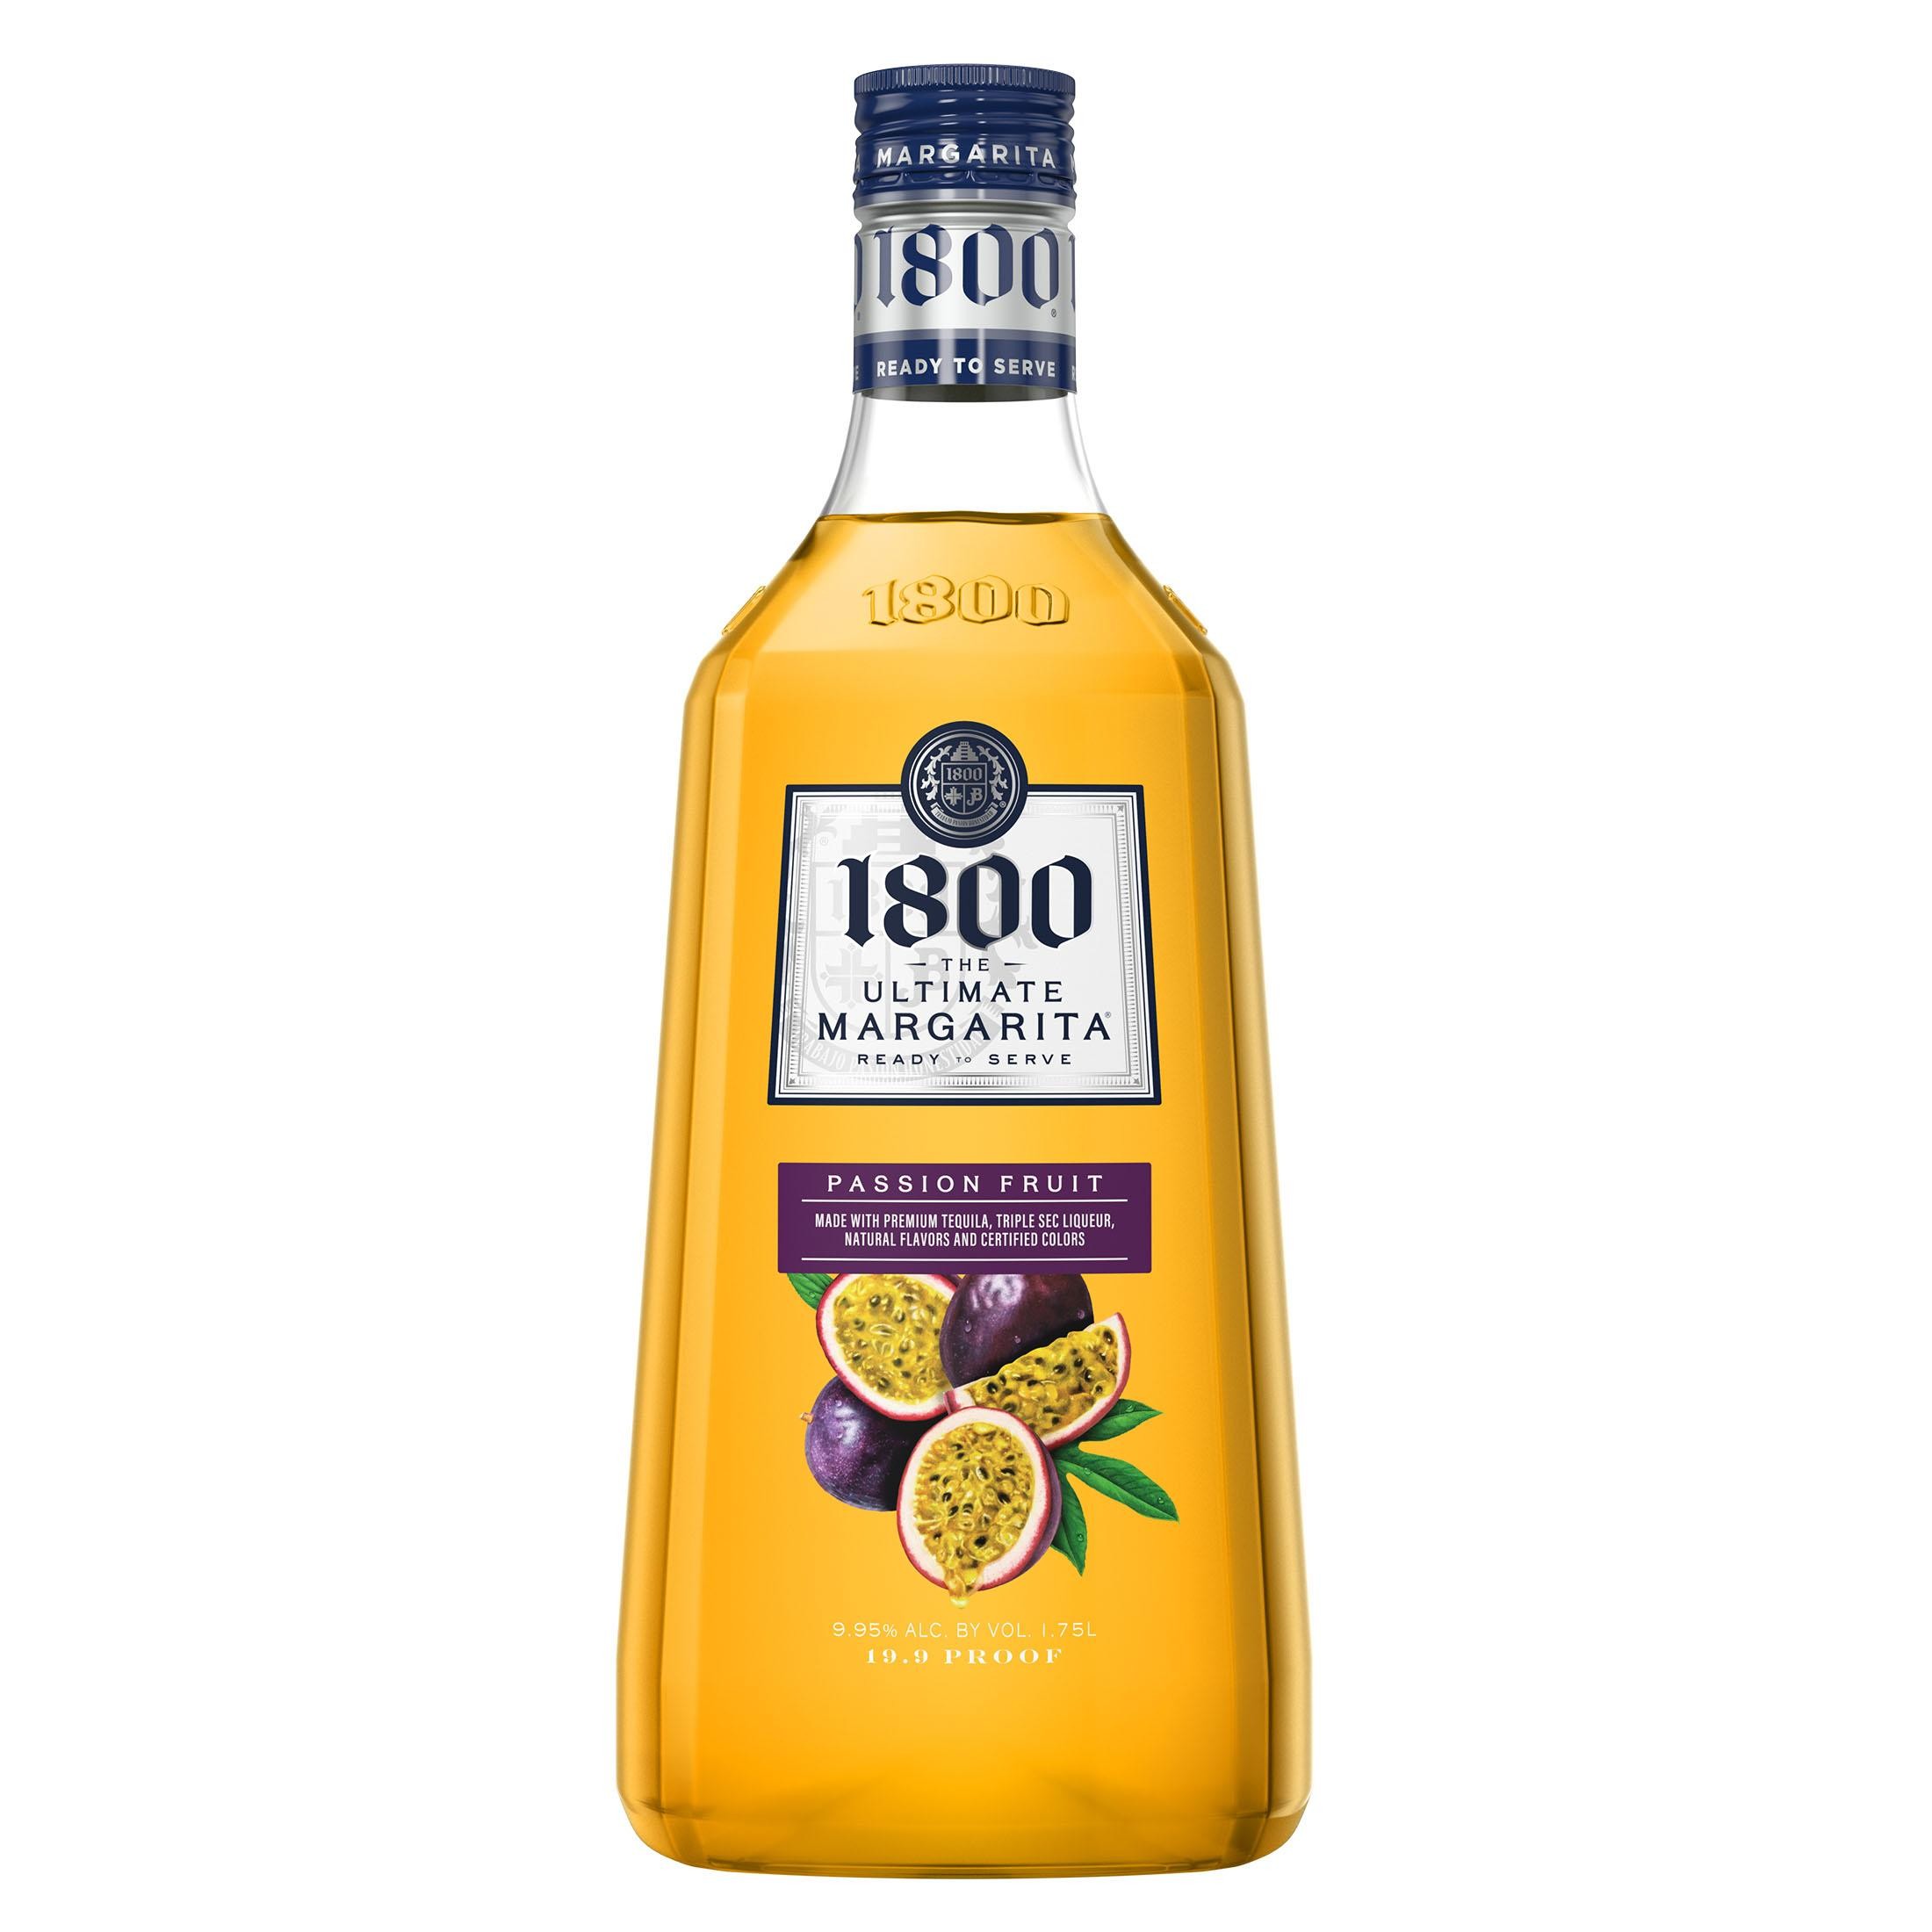 1800 Tequila the Ultimate Margarita Passion Fruit Flavored Tequila - 1.75l Plastic Bottle